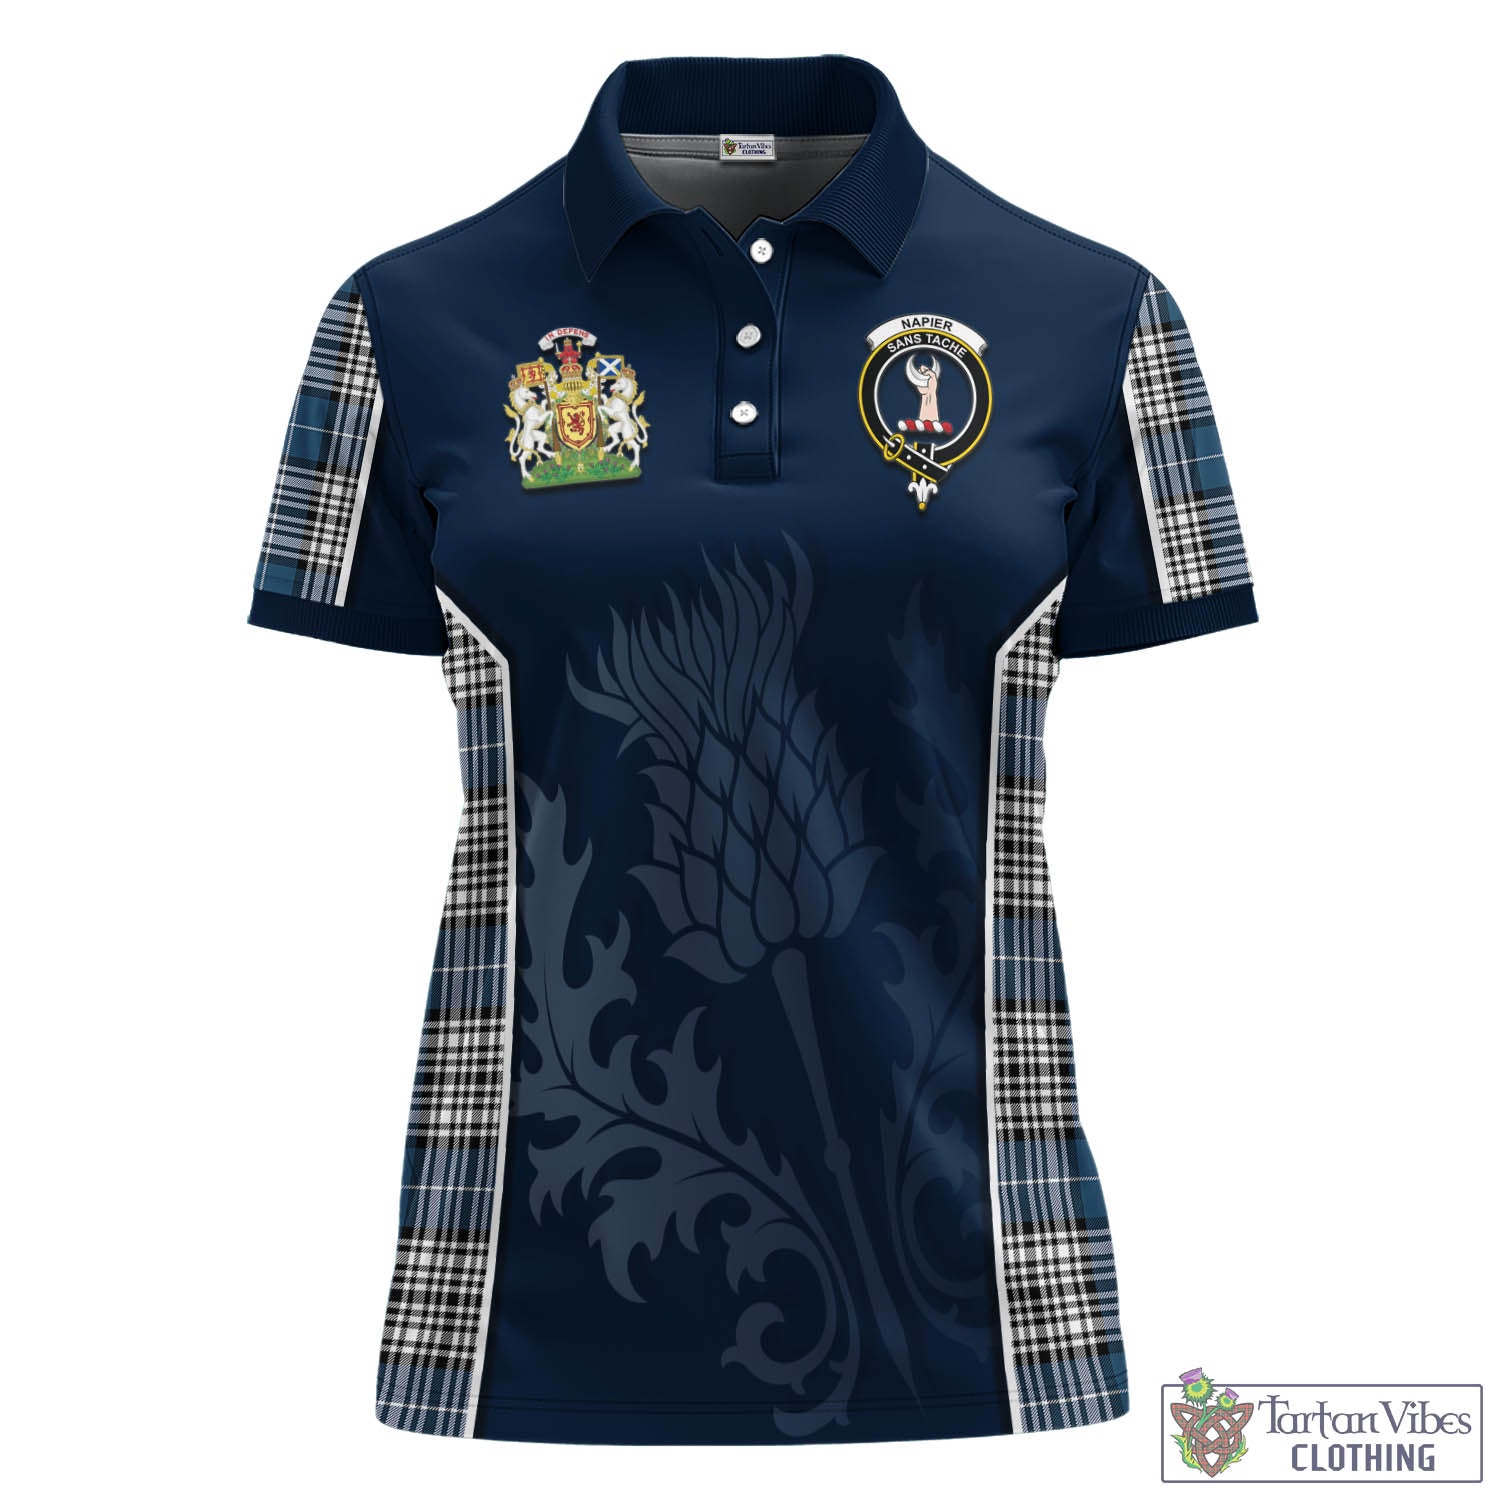 Tartan Vibes Clothing Napier Modern Tartan Women's Polo Shirt with Family Crest and Scottish Thistle Vibes Sport Style